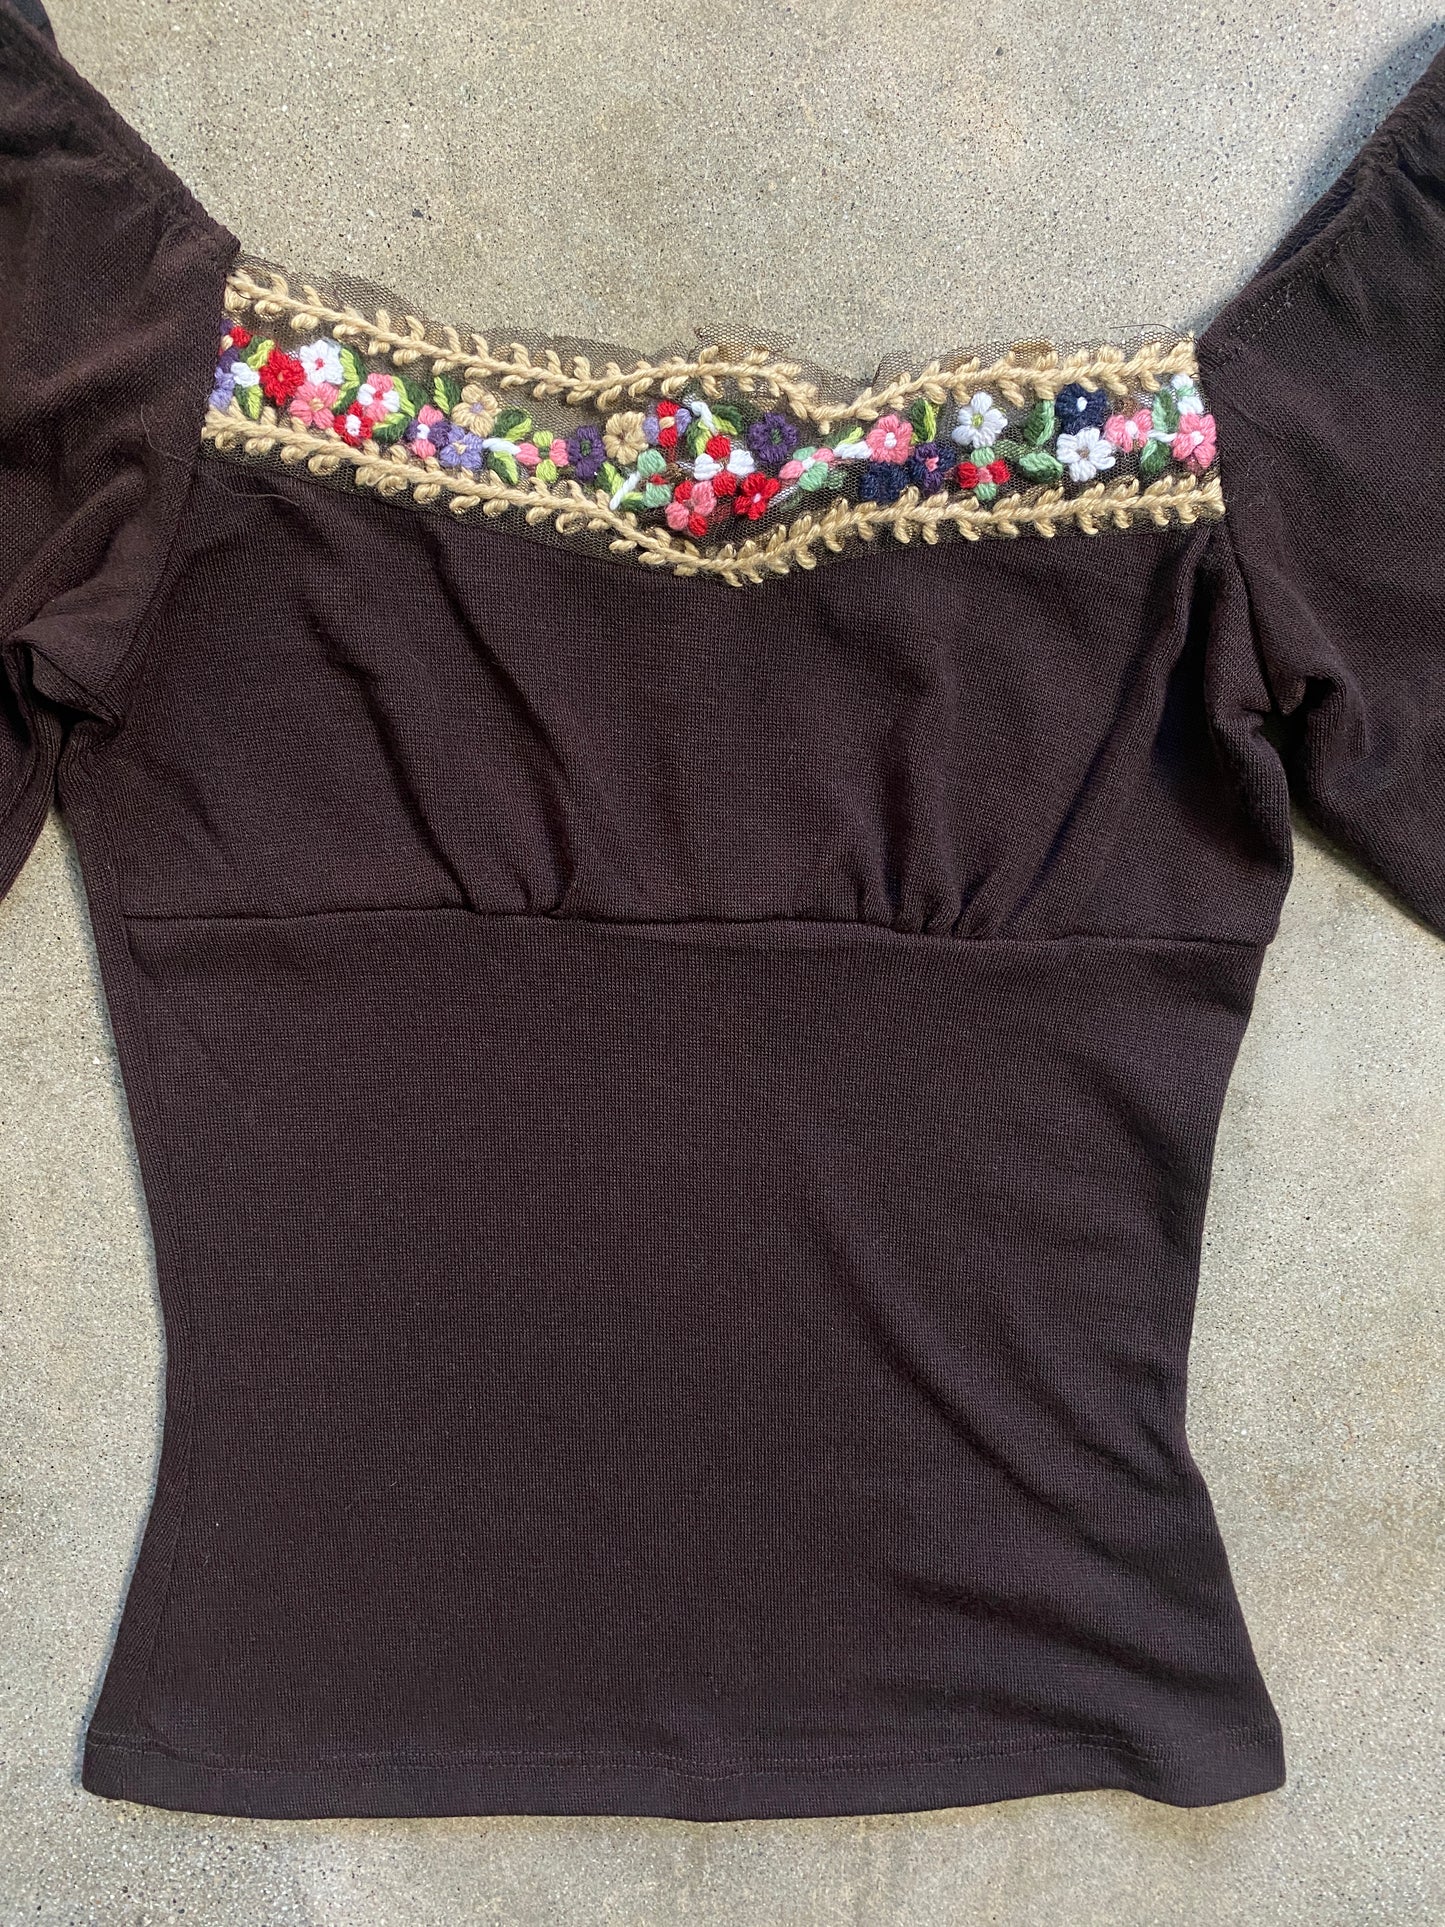 00's Deadstock Chocolate Brown Fairy Grunge Top